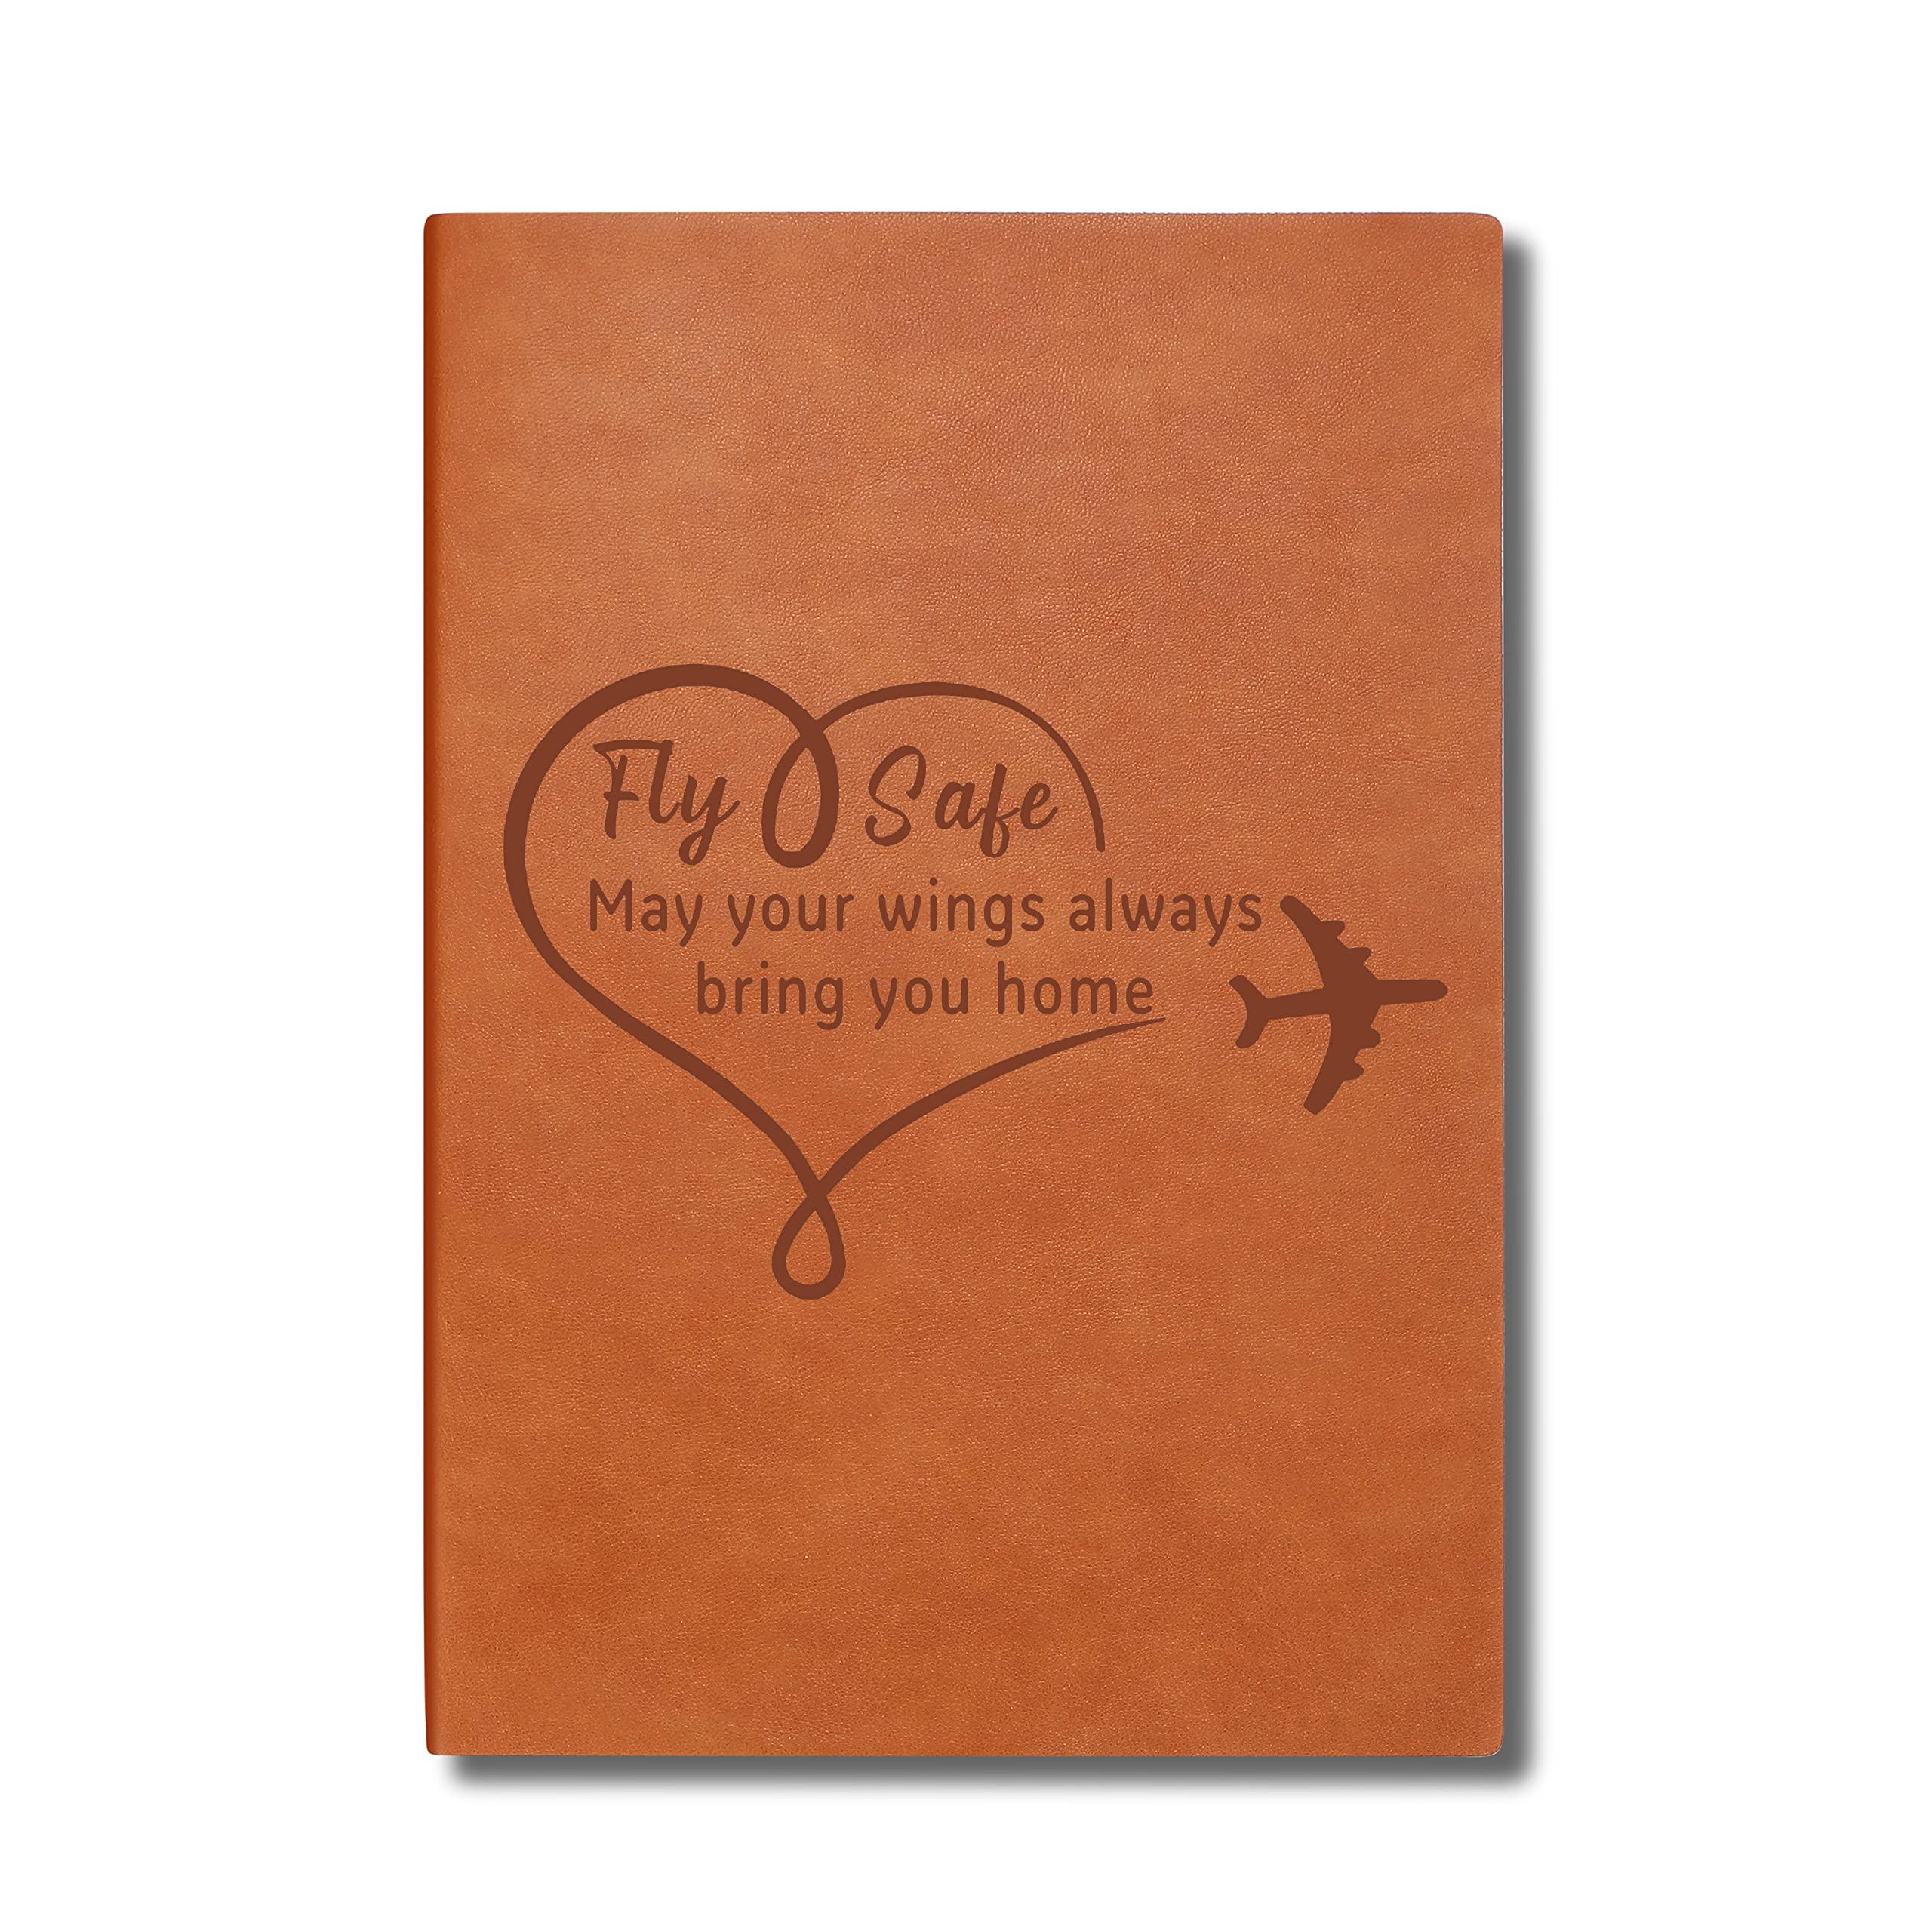 LBWCER Pilot Gift Fly Safe Lined Journal Notebook Pilot Gifts School Business Work Travel Writing Lined Journal Notebook Long Distance Traveler Gift (Fly)